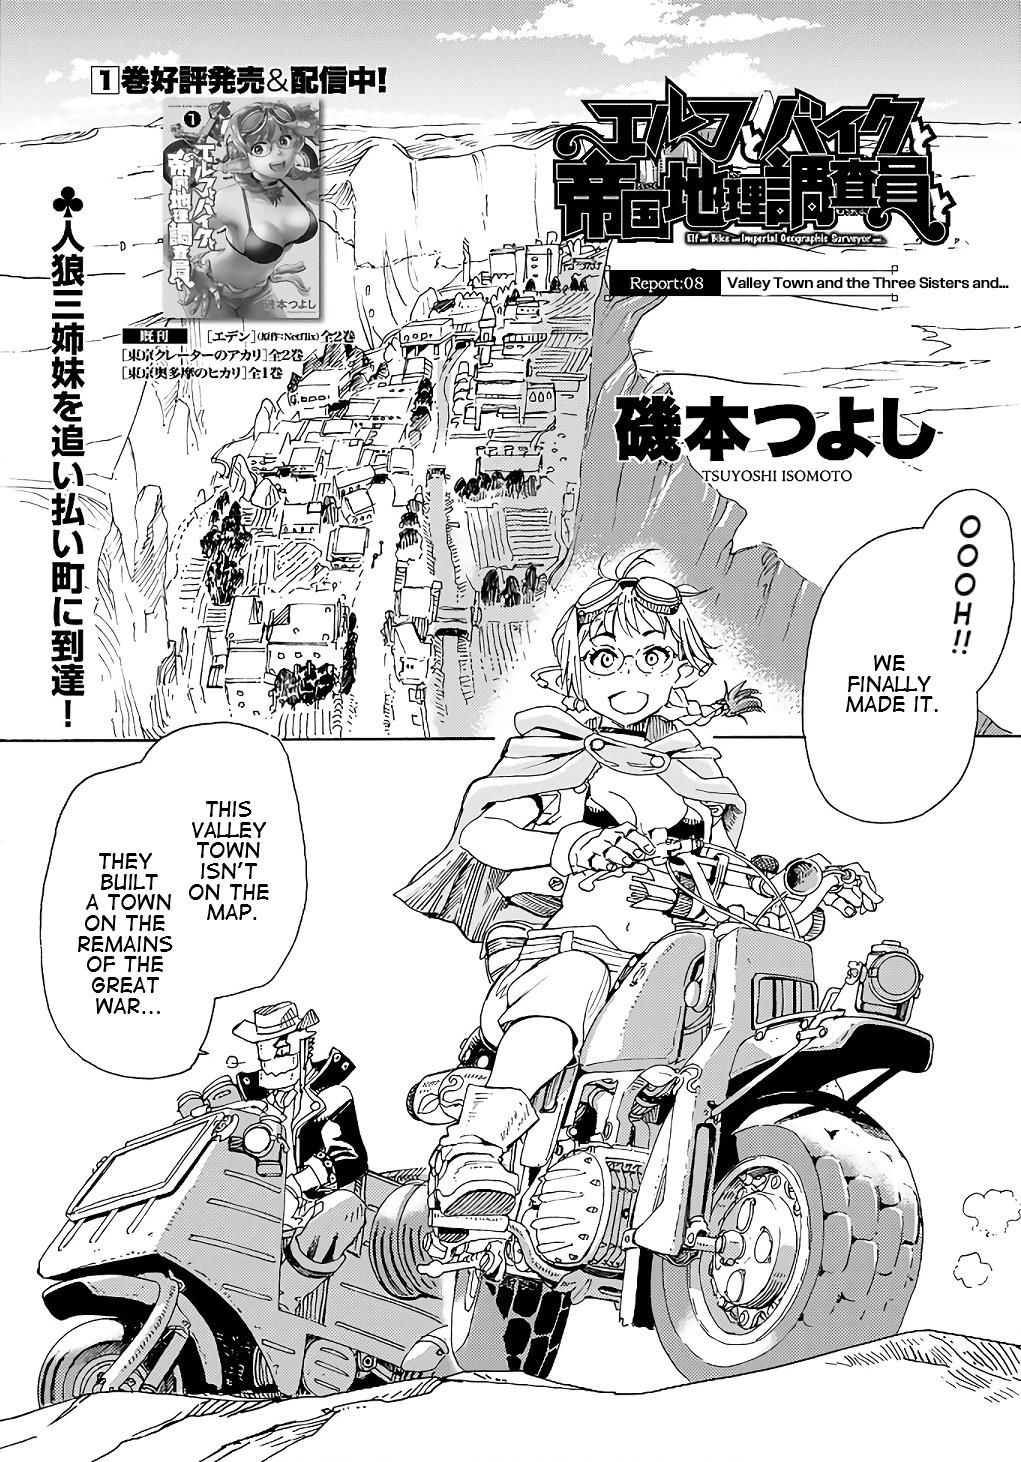 Elf And Bike And Imperial Geographic Surveyor And... - Page 1